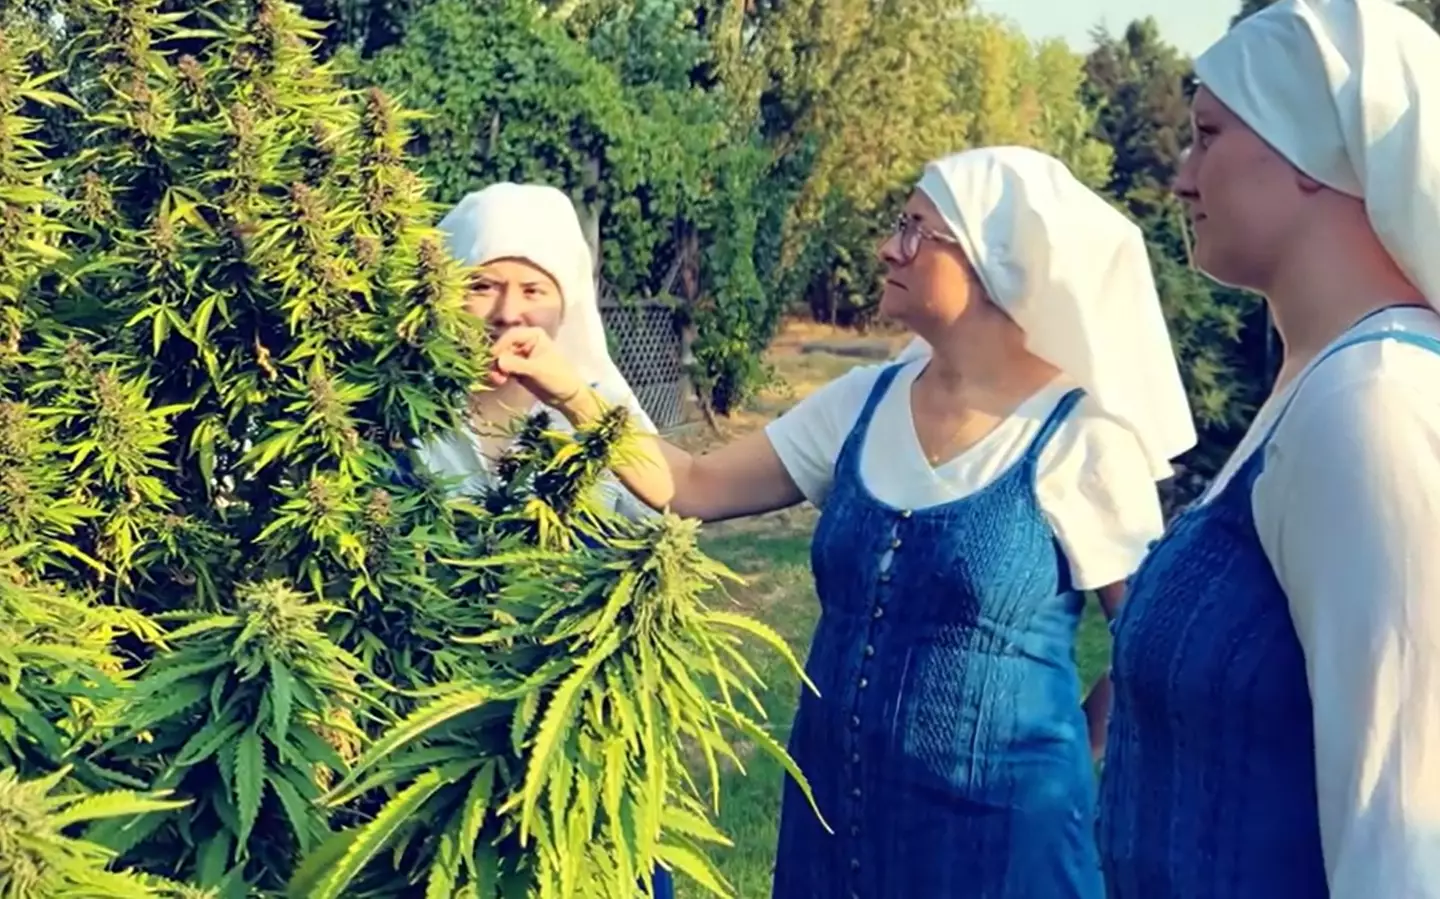 The nuns grow cannabis according to moon cycles, though in their part of California it's still illegal.